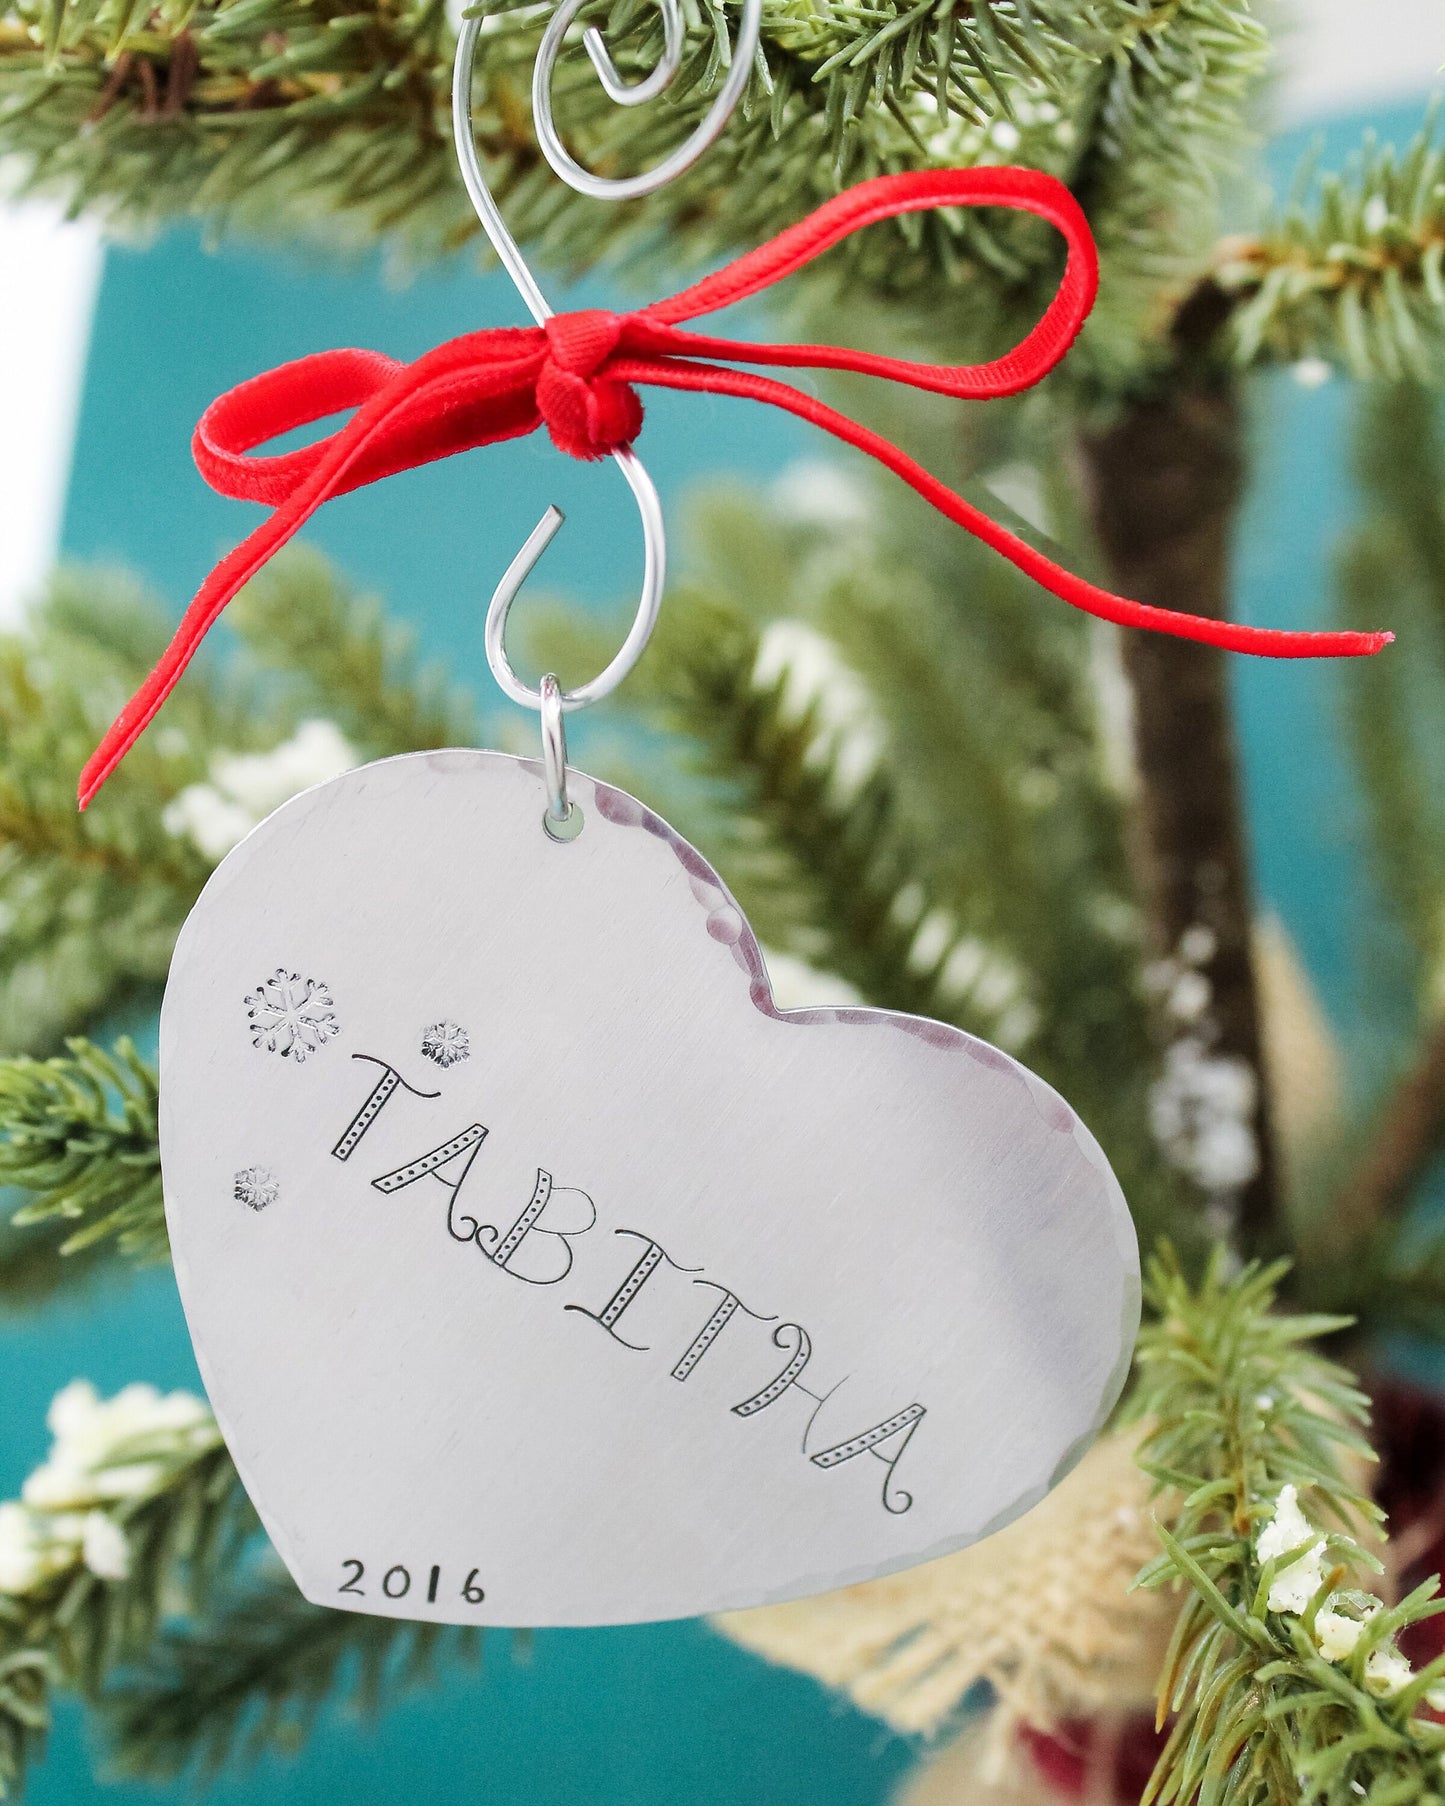 Personalized Heart Ornament, Children's Ornament, Custom Name Ornament, Heart Christmas Ornament, Hand Stamped, Gifts under 20